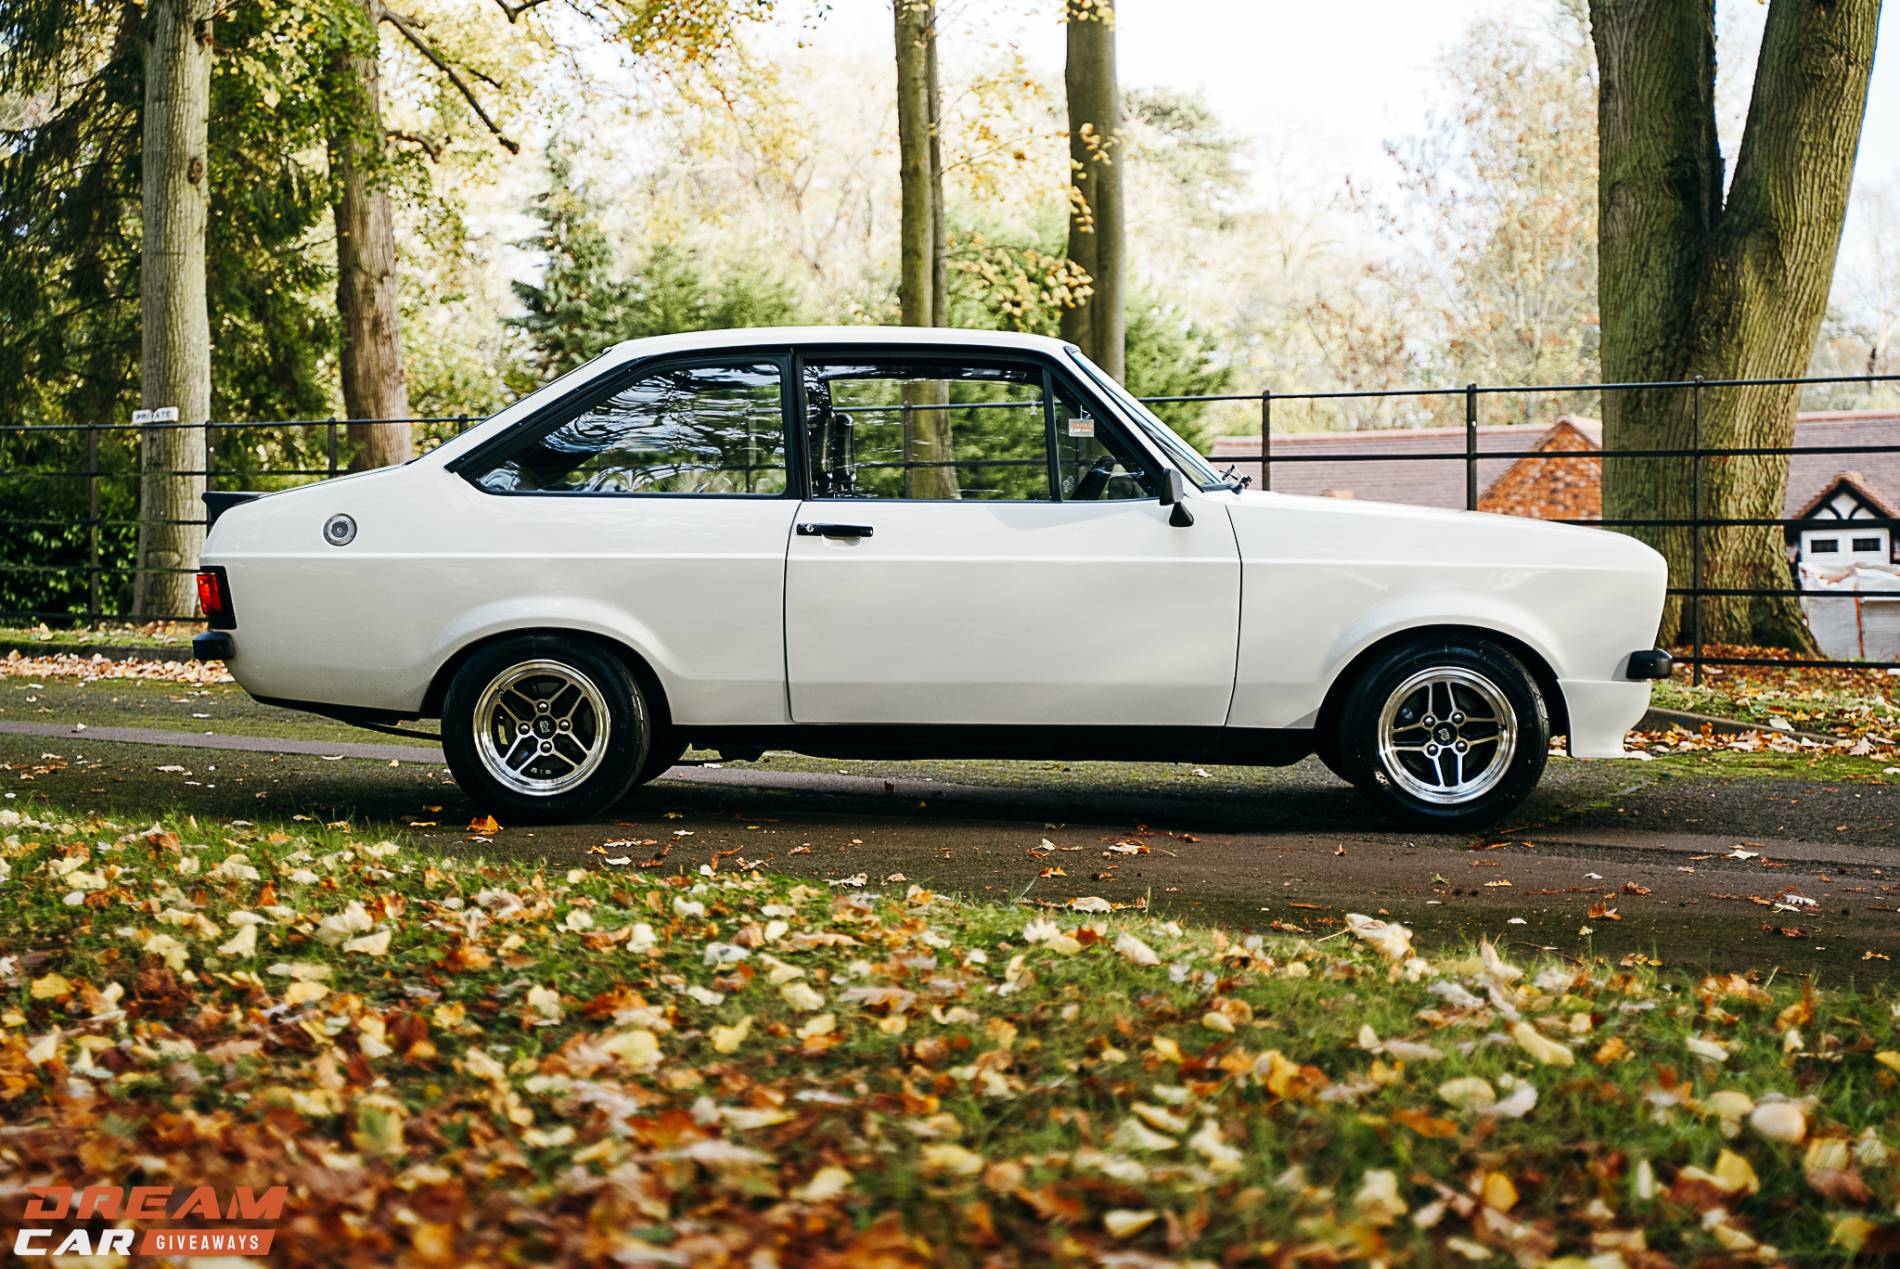 214HP Ford Escort MK2 - Only 1899 Entries